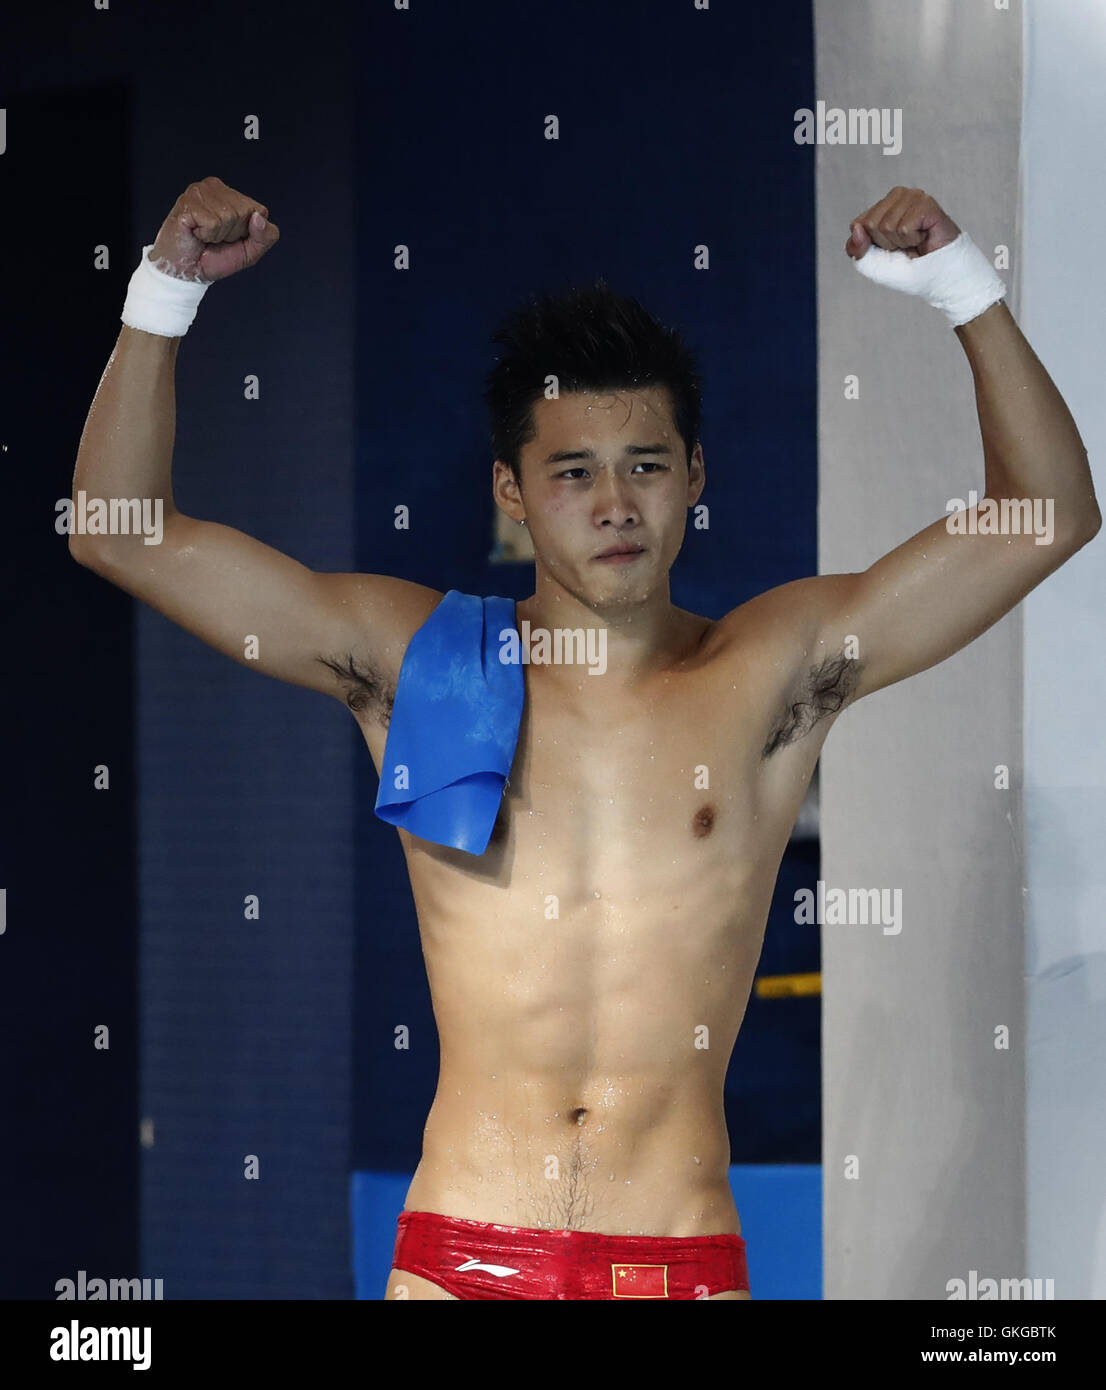 Rio De Janeiro, Brazil. 20th Aug, 2016. China's Chen Aisen celebrates after the men's 10m platform of Diving at the 2016 Rio Olympic Games in Rio de Janeiro, Brazil, on Aug. 20, 2016. Chen Aisen won the gold medal. Credit:  Ding Xu/Xinhua/Alamy Live News Stock Photo